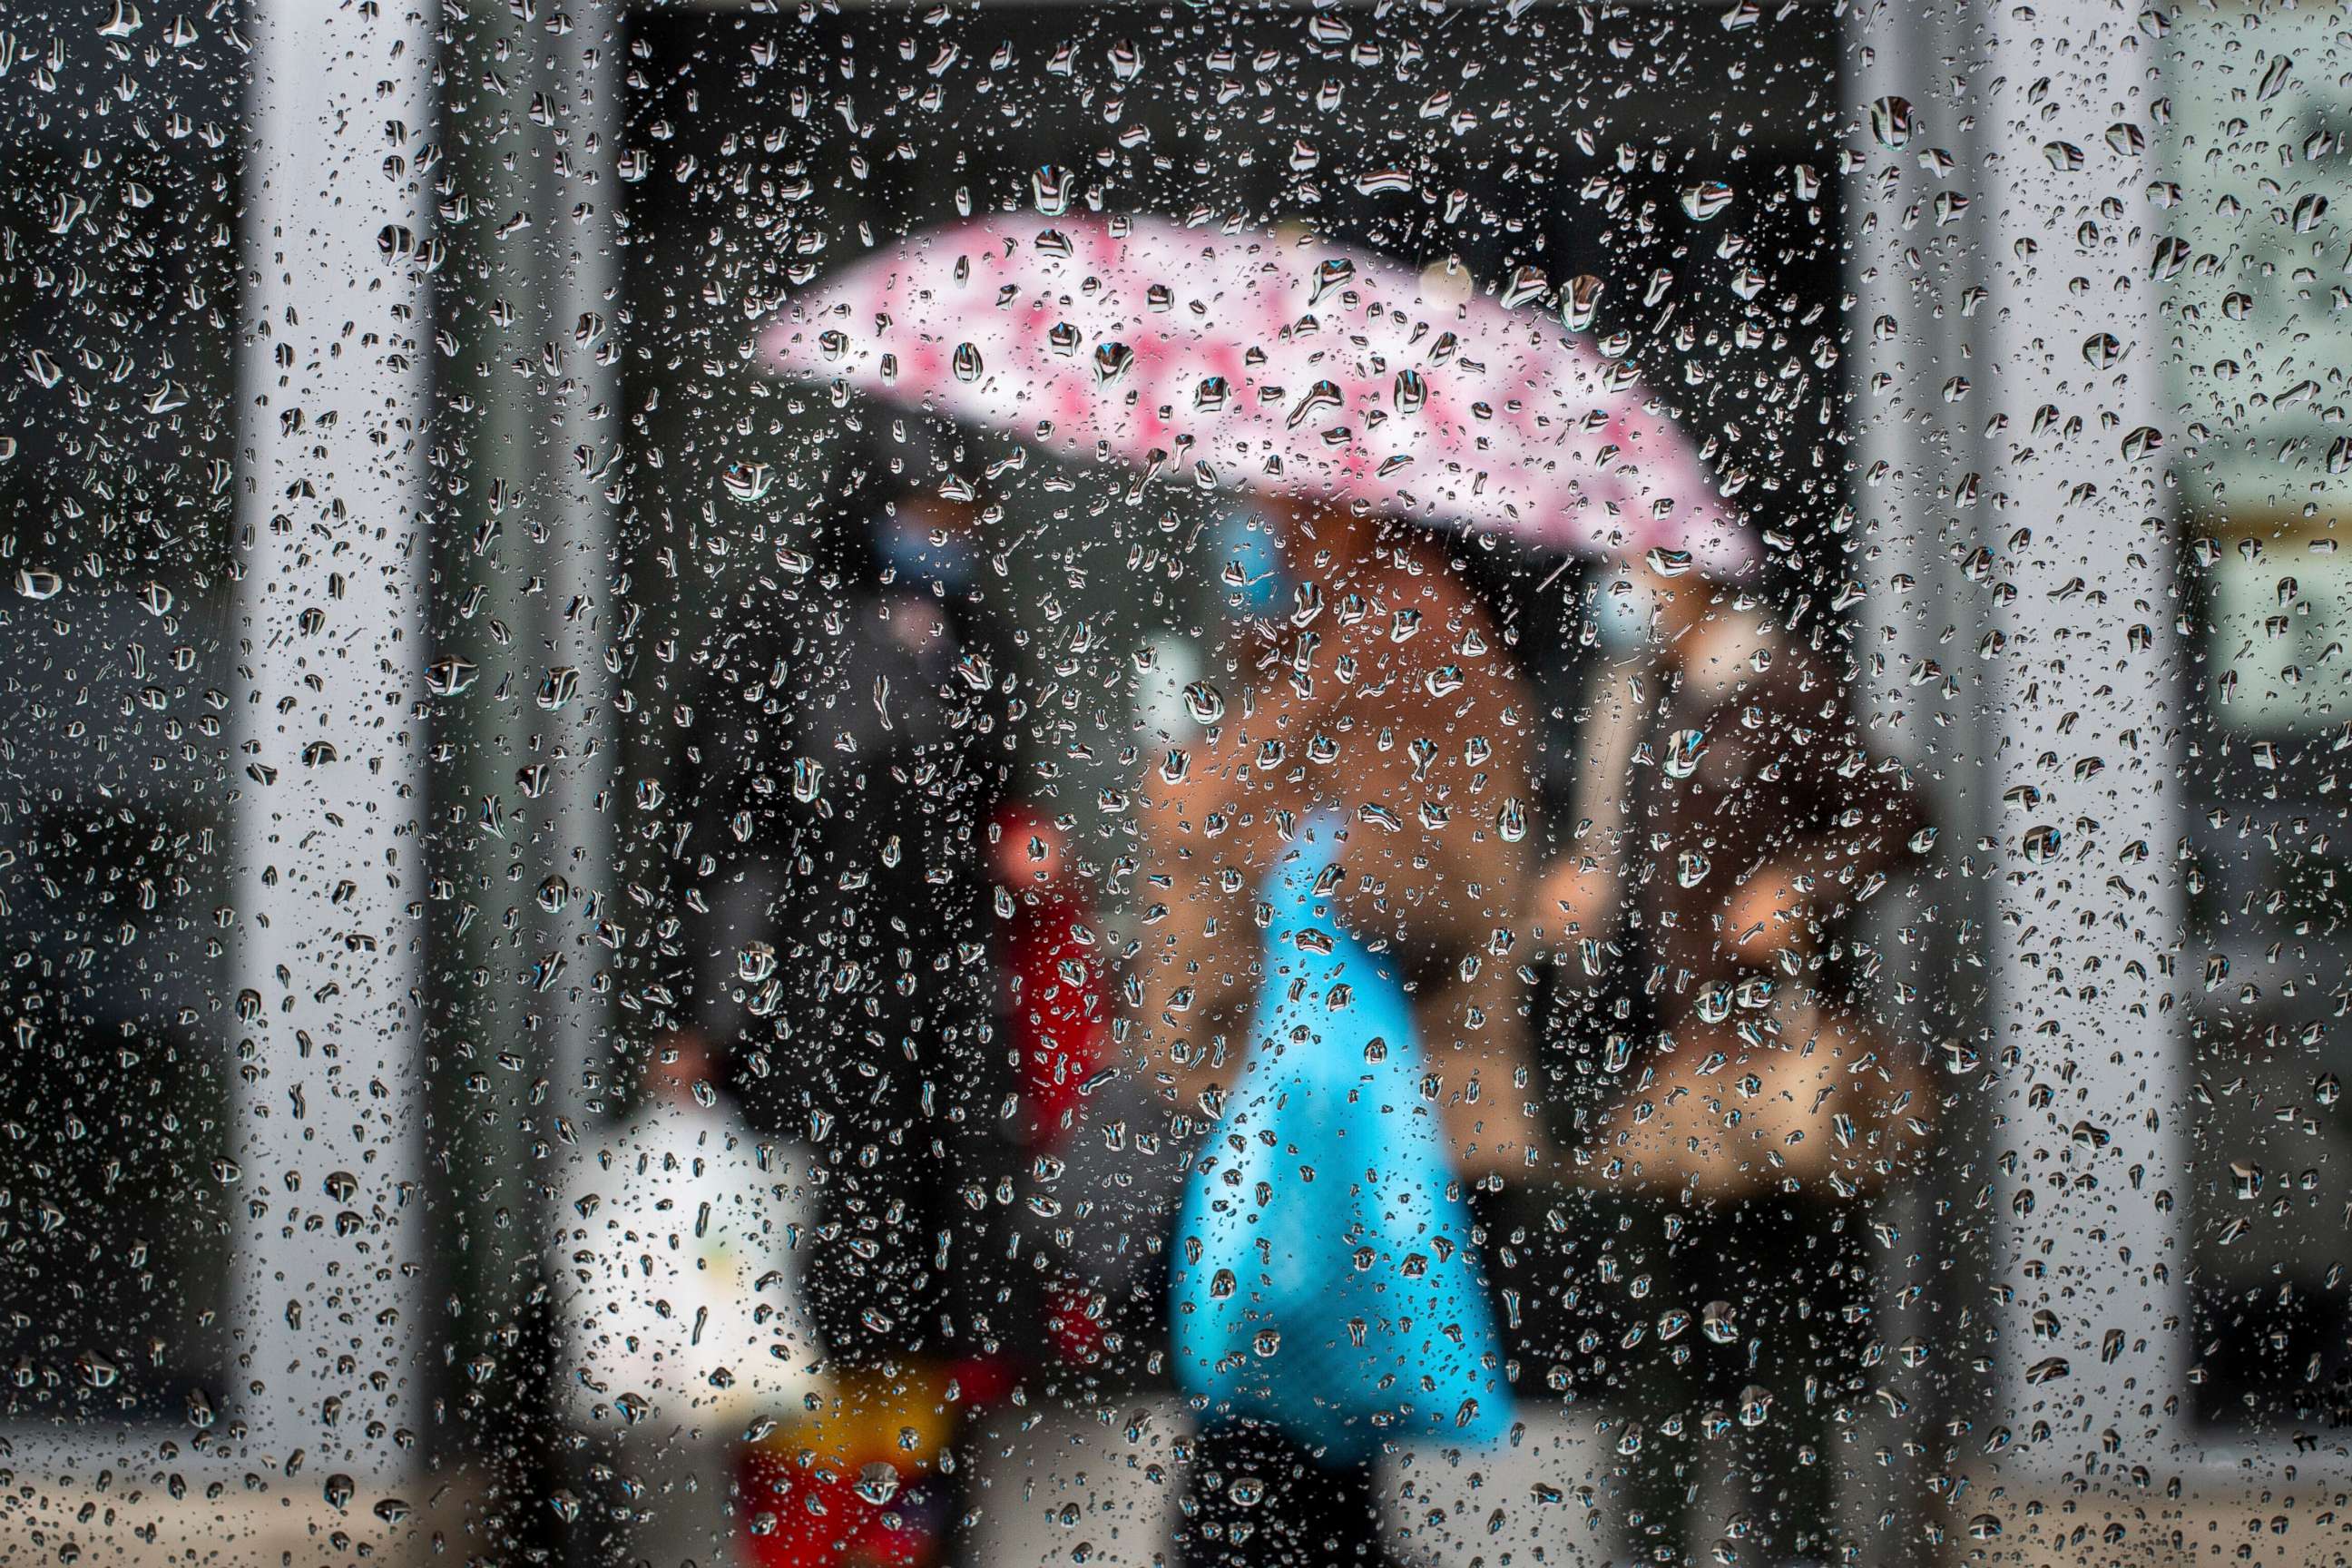 PHOTO: Women try to stay dry on Western Avenue as a much needed rain lands in Los Angeles, Wednesday, March 3, 2021.